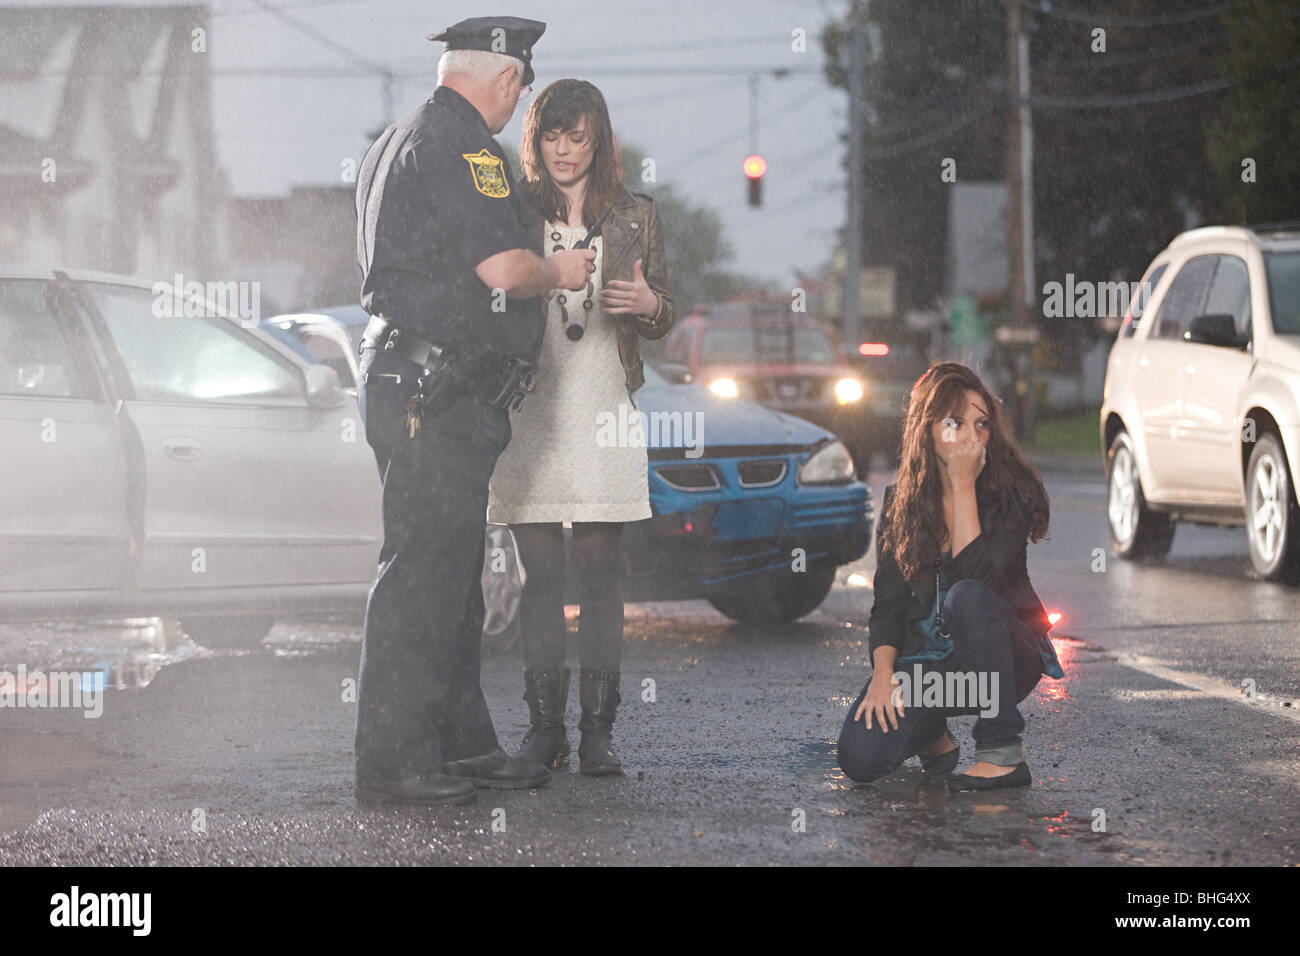 Police officer and young women at scene of accident Stock Photo